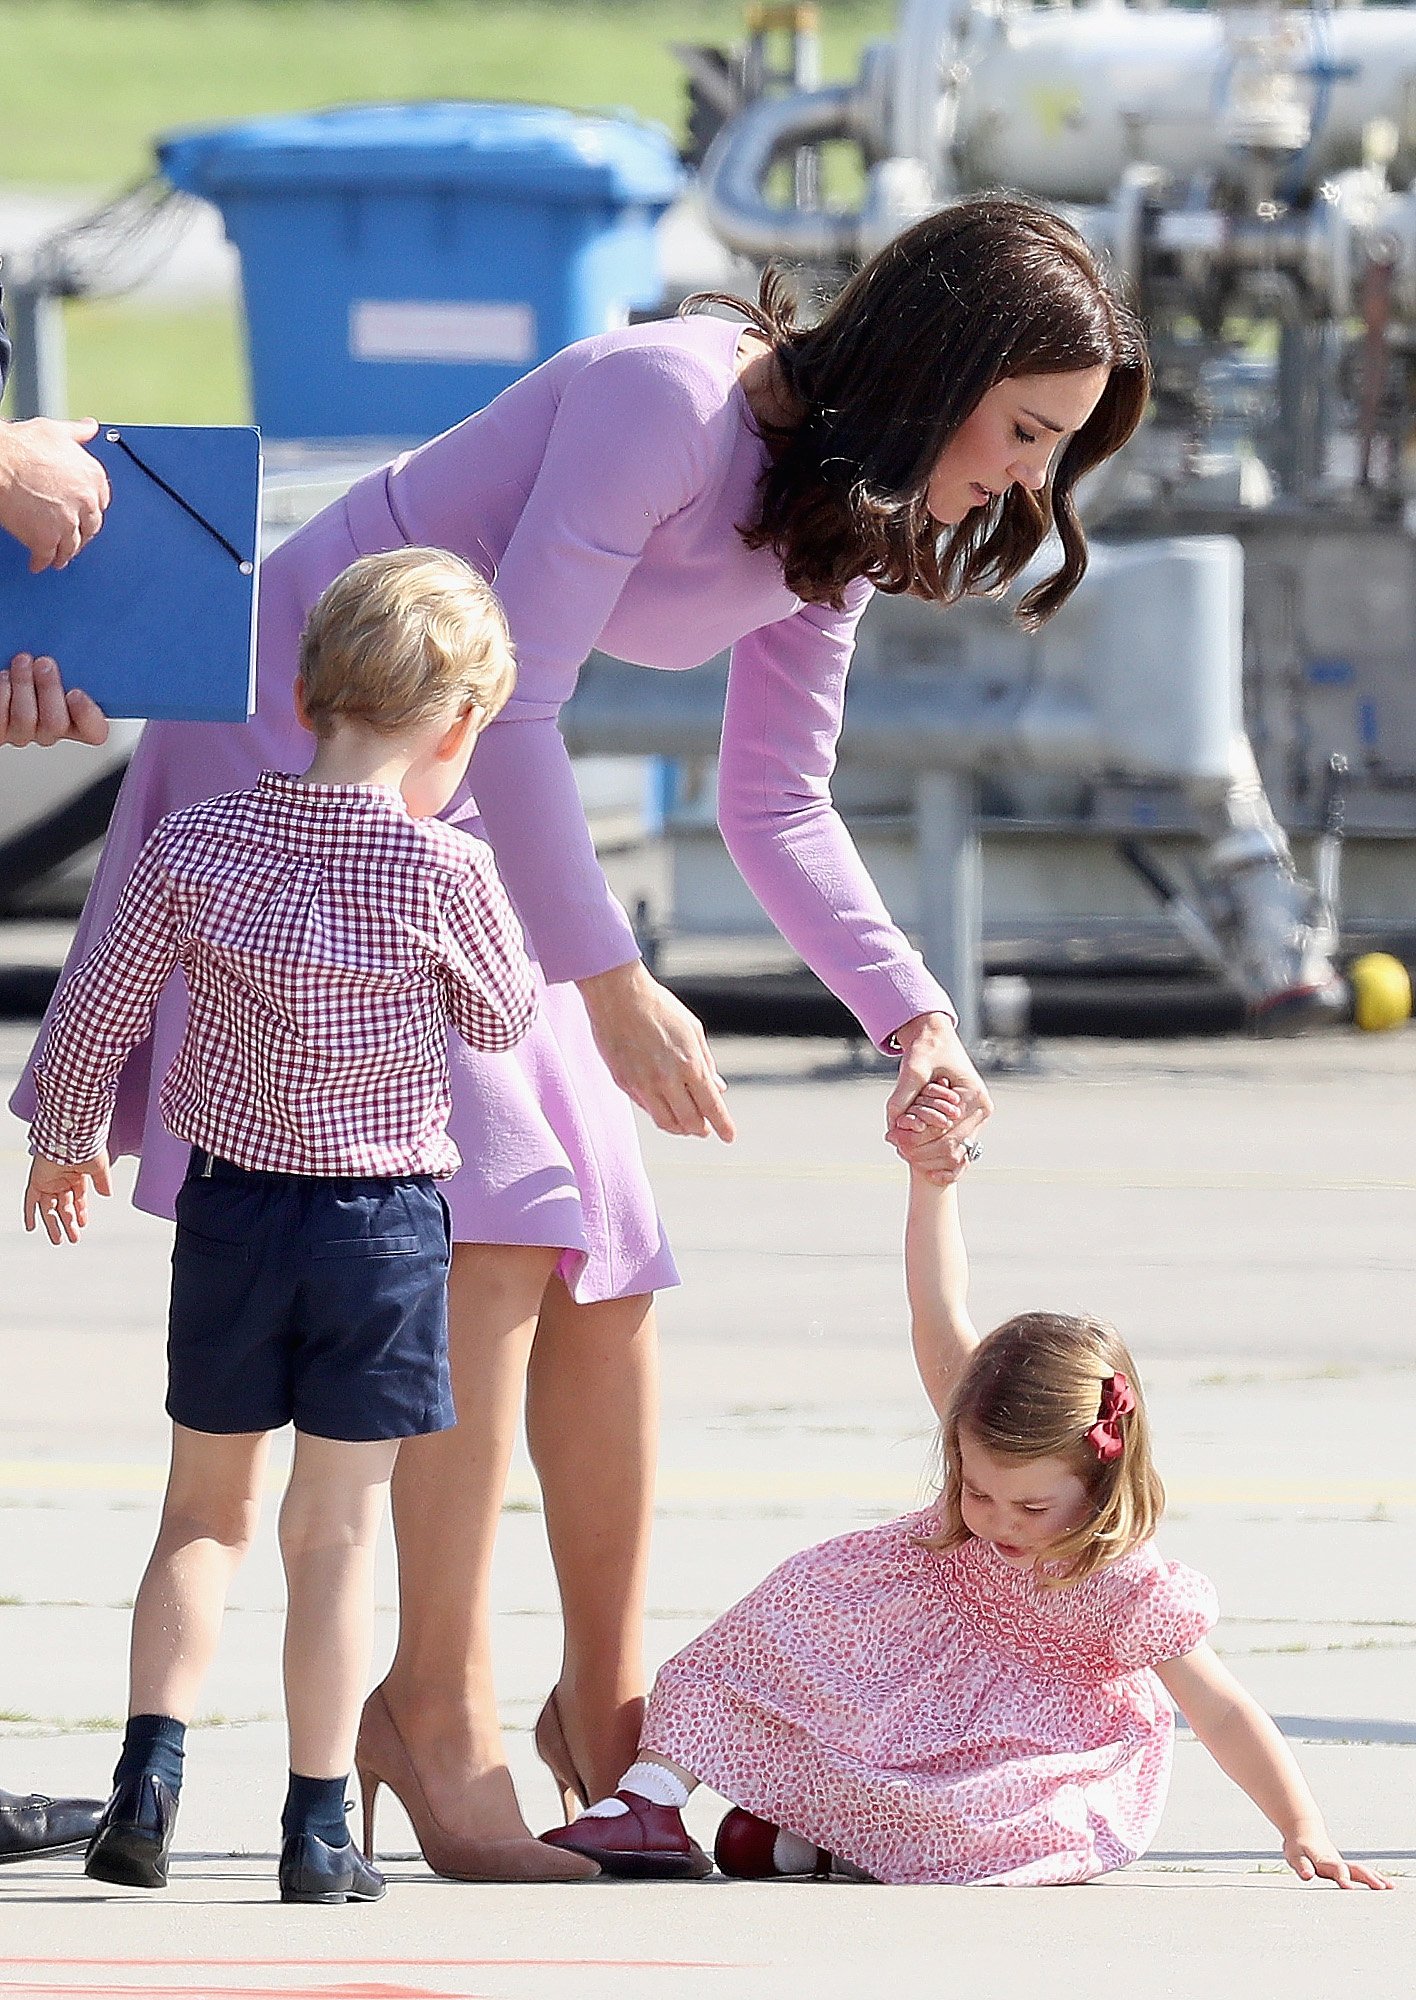 Prince William with his wife Kate Middleton and kids, Prince George and Princess Charlotte pictured before departing from Hamburg airport on the last day of their official visit to Poland and Germany on July 21, 2017 in Hamburg, Germany. / Source: Getty Images